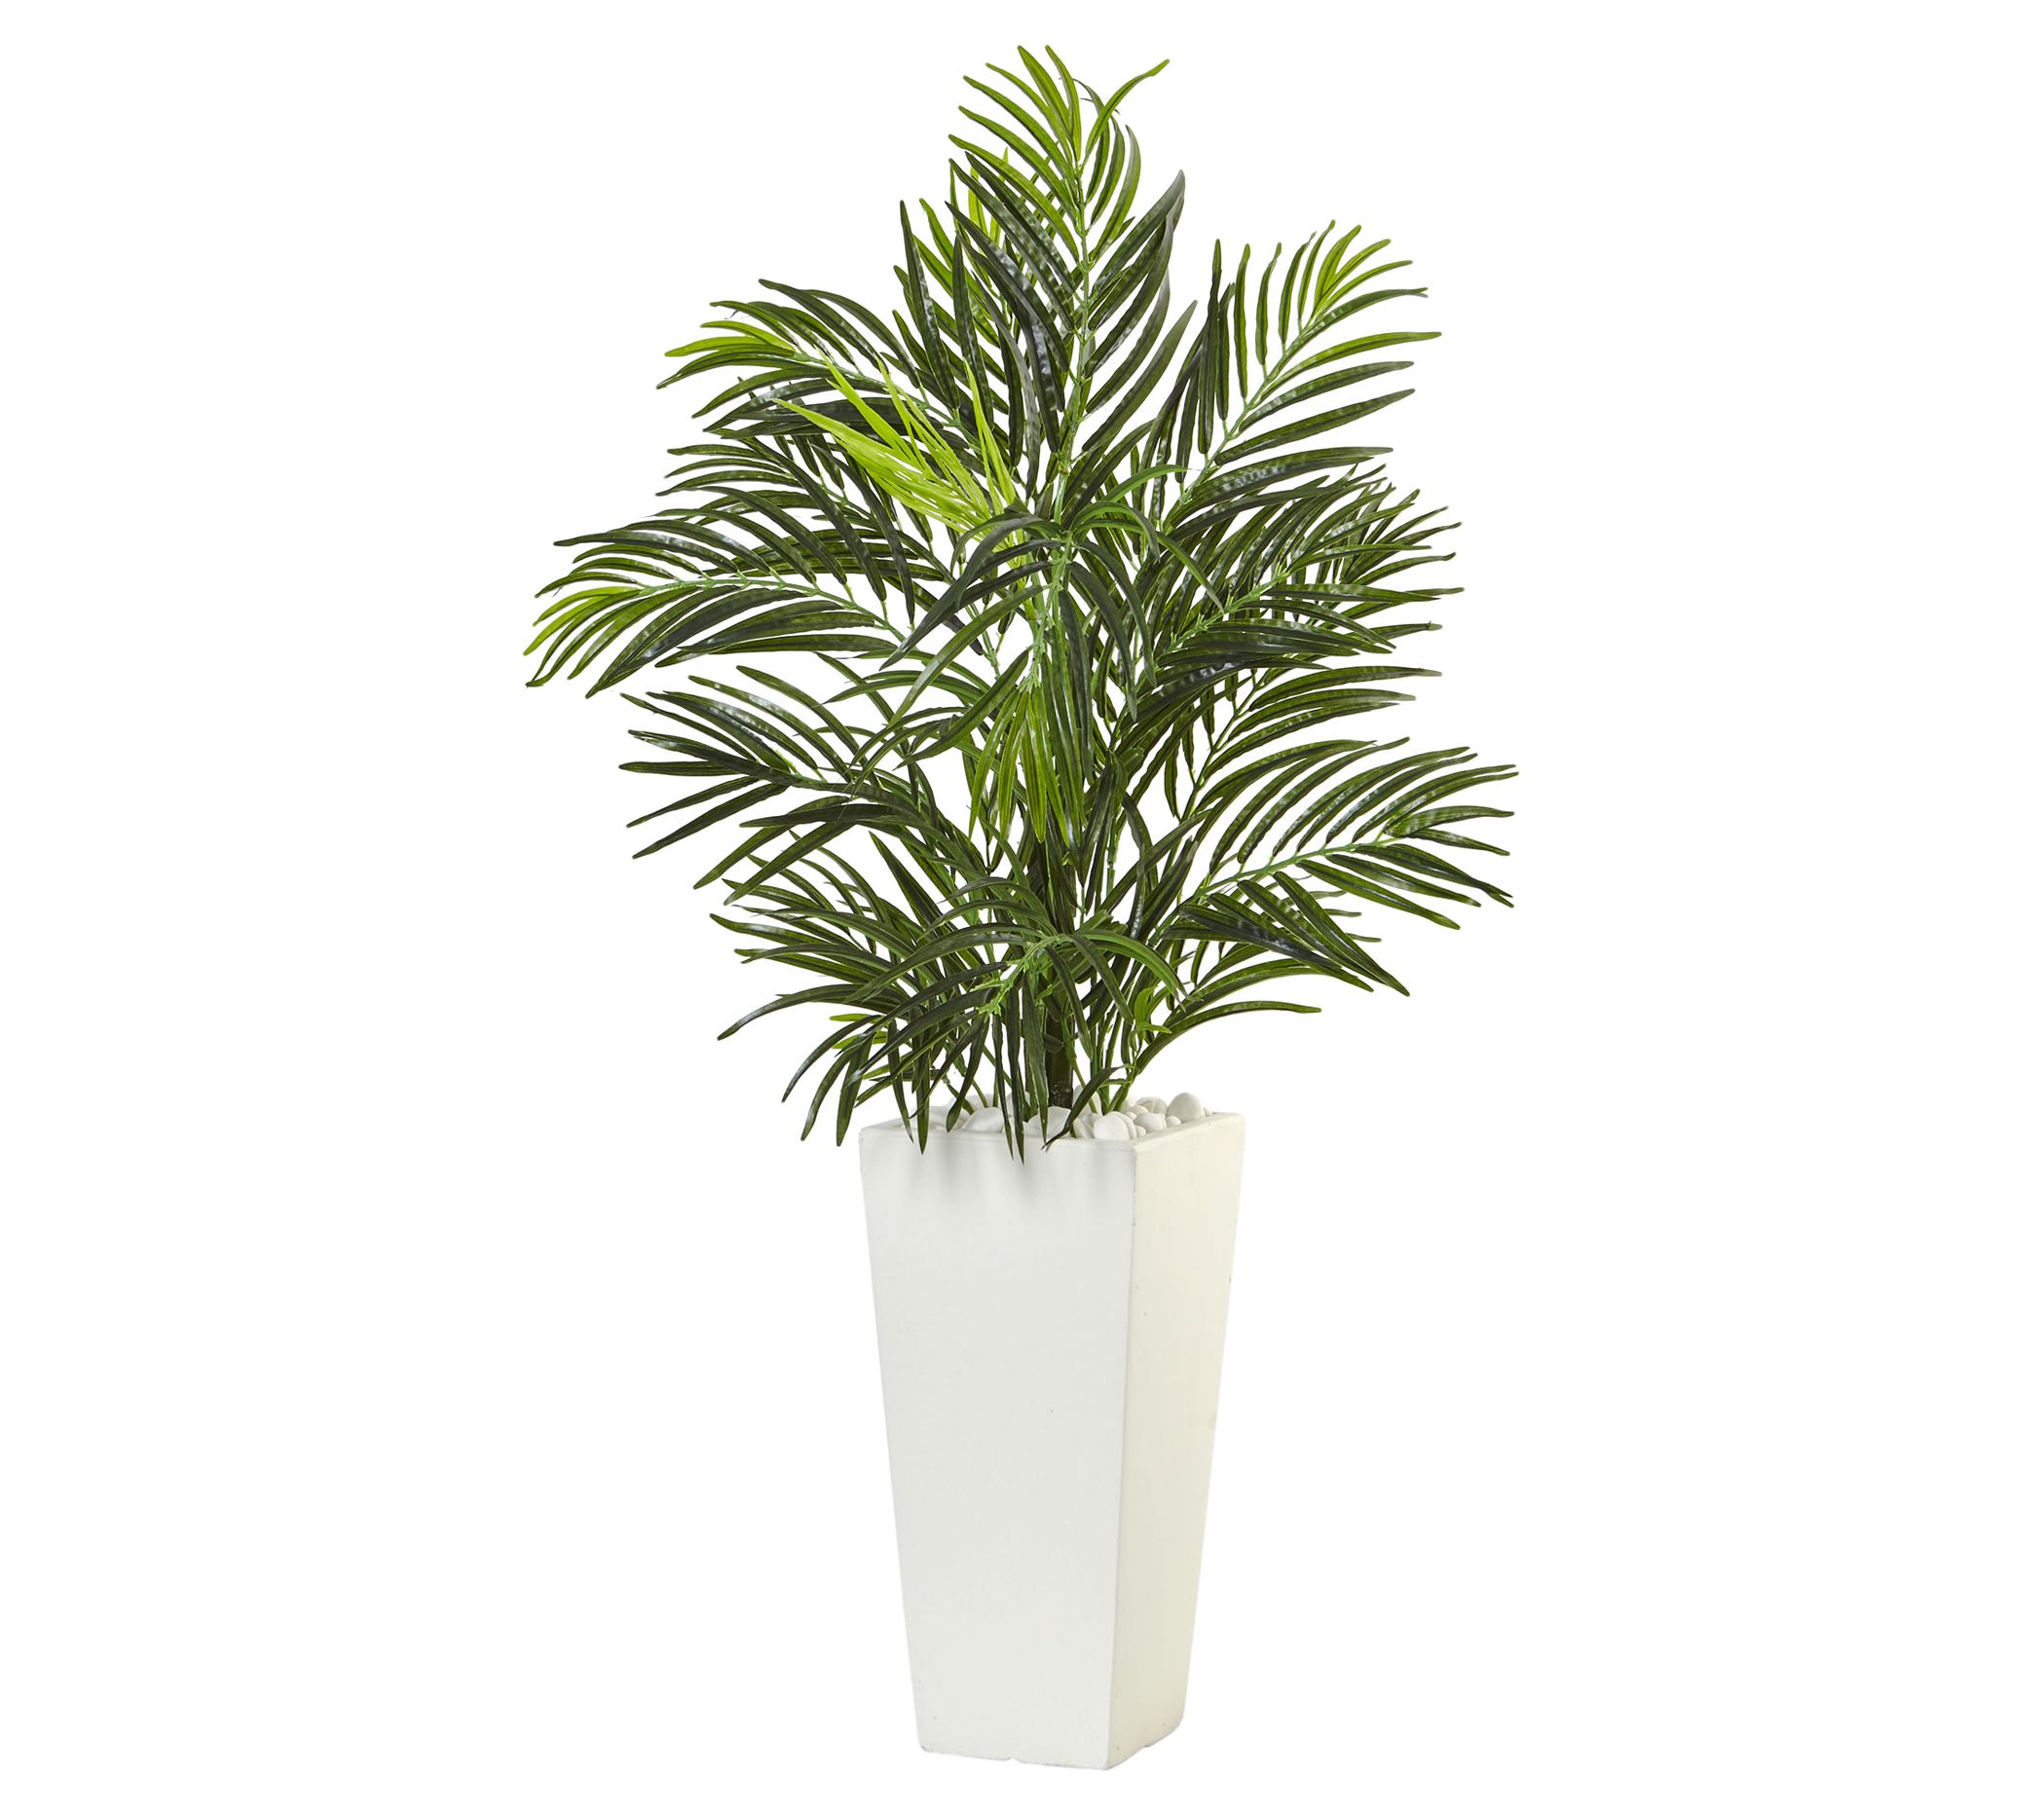 Areca Palm in White Square Planter by Nearly Natural - QVC.com